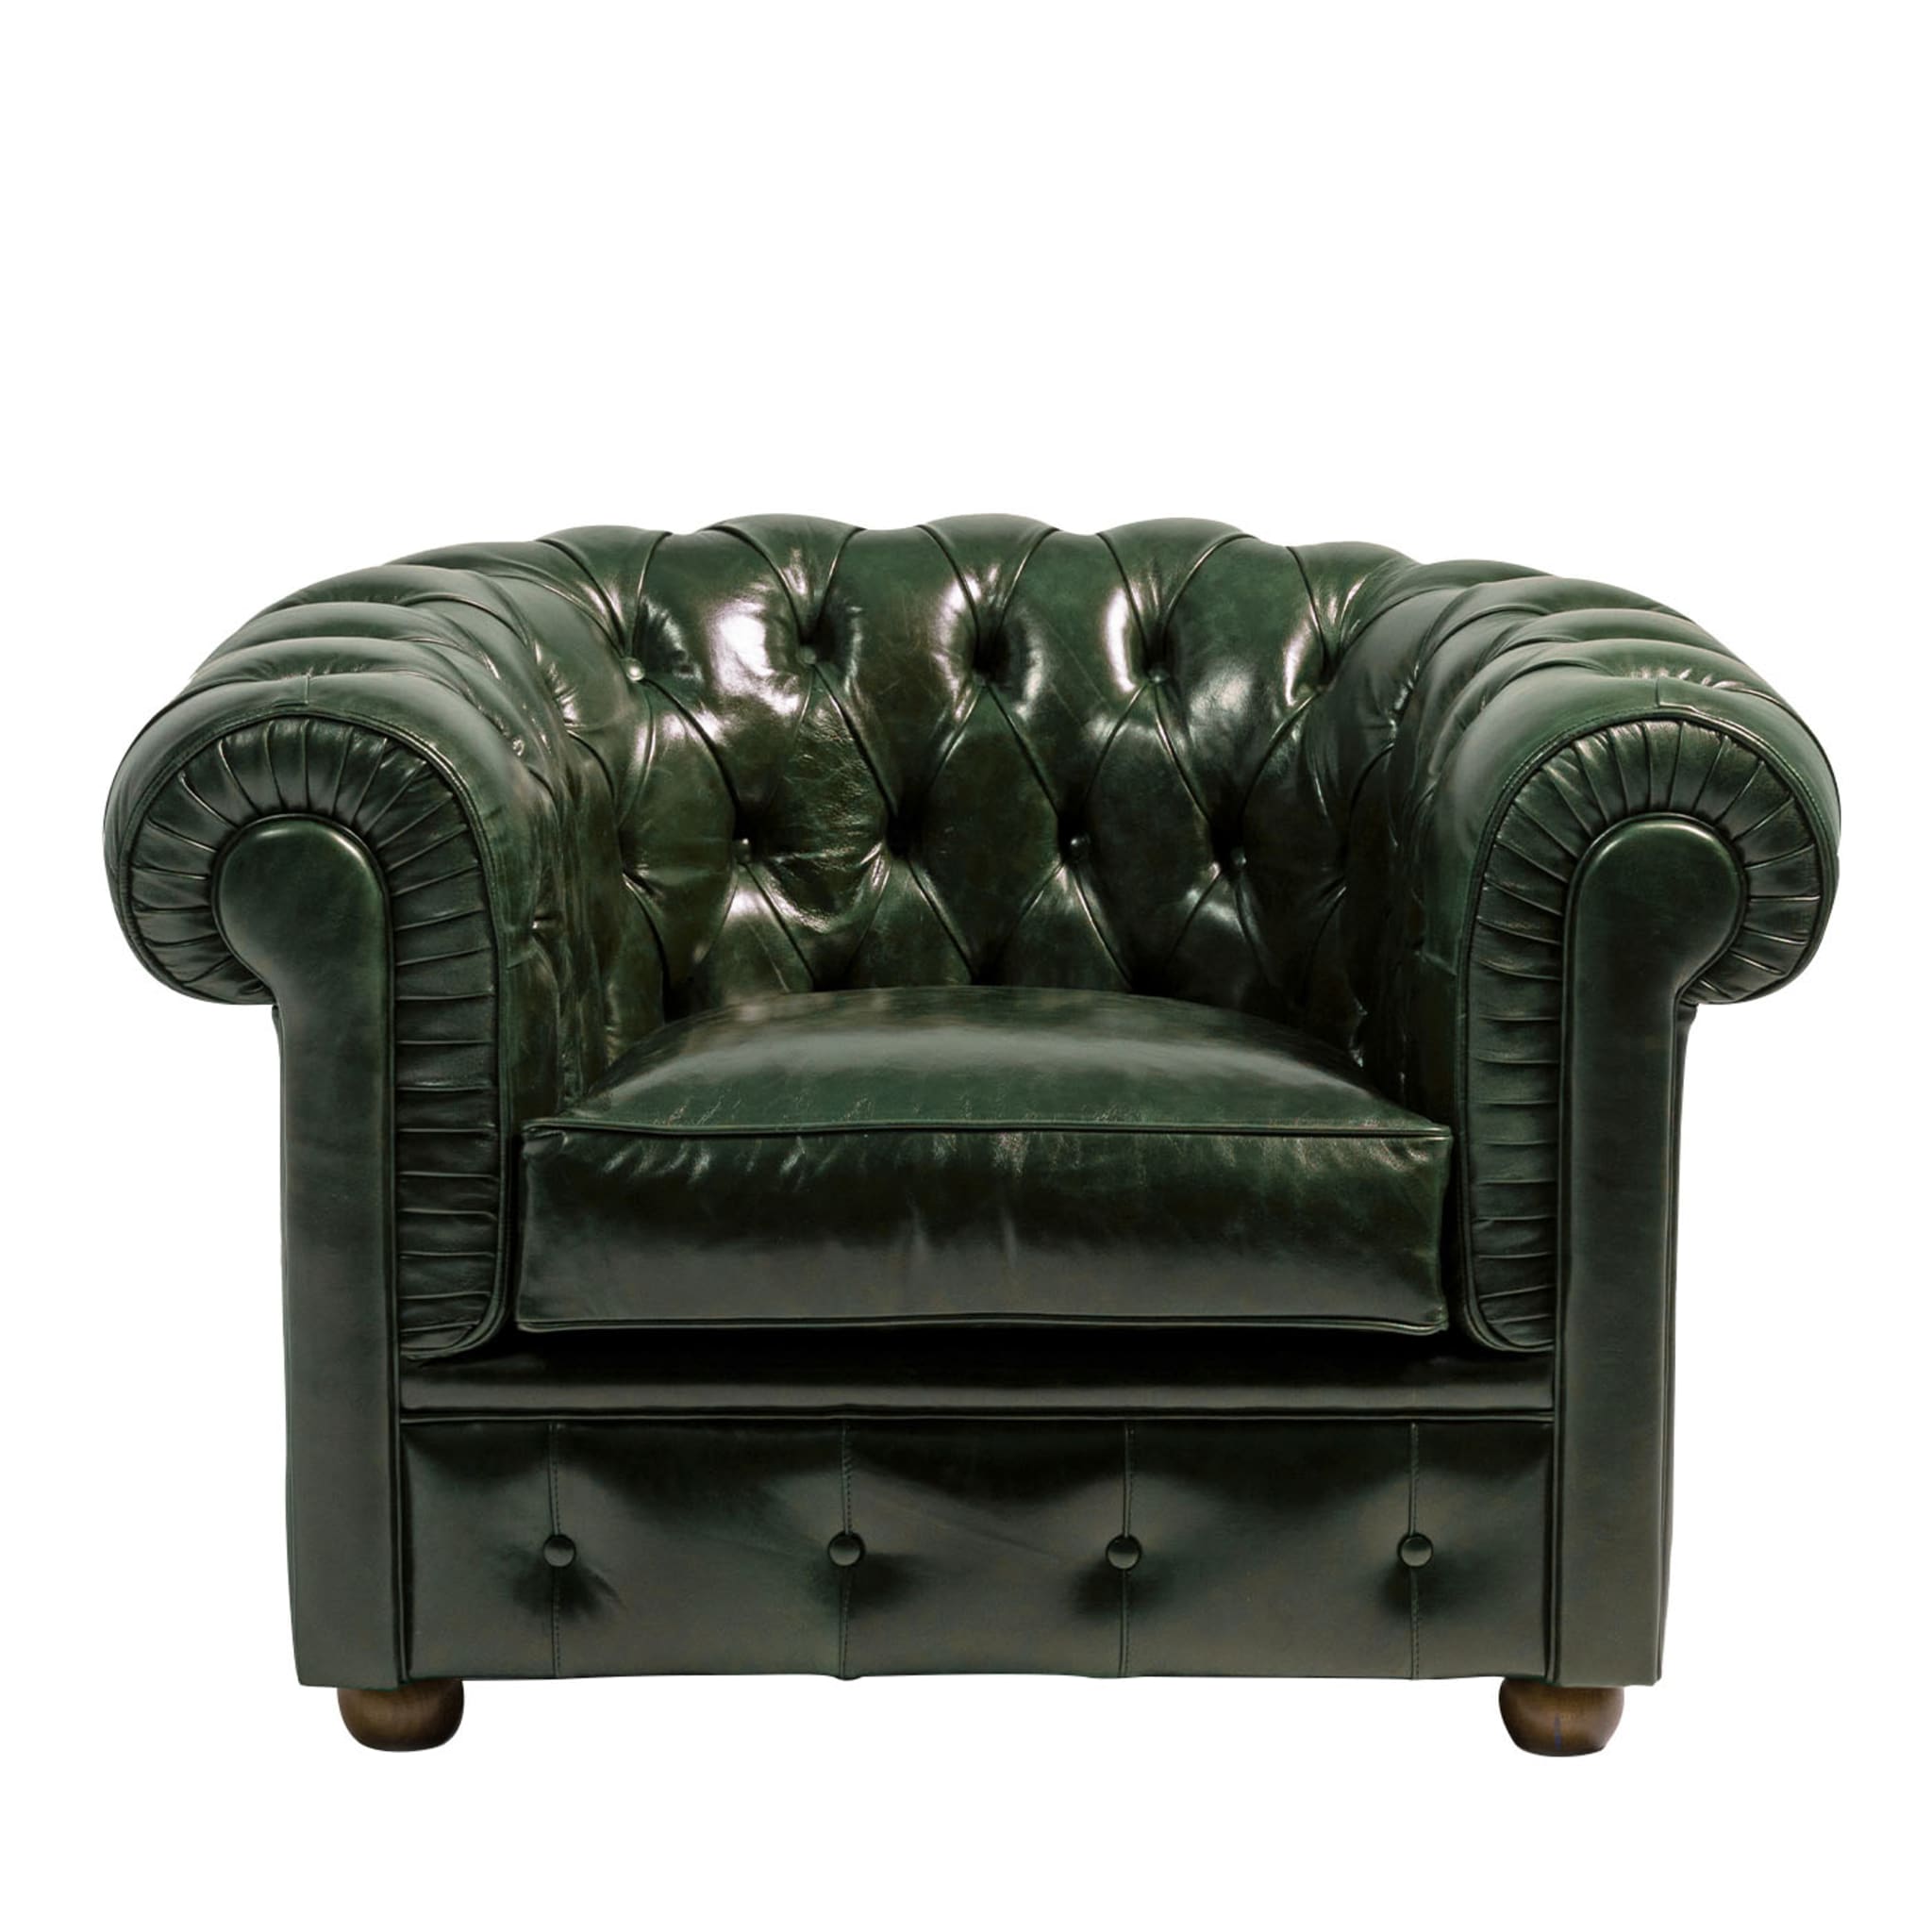 Chesterfield Green Leather Armchair - Main view